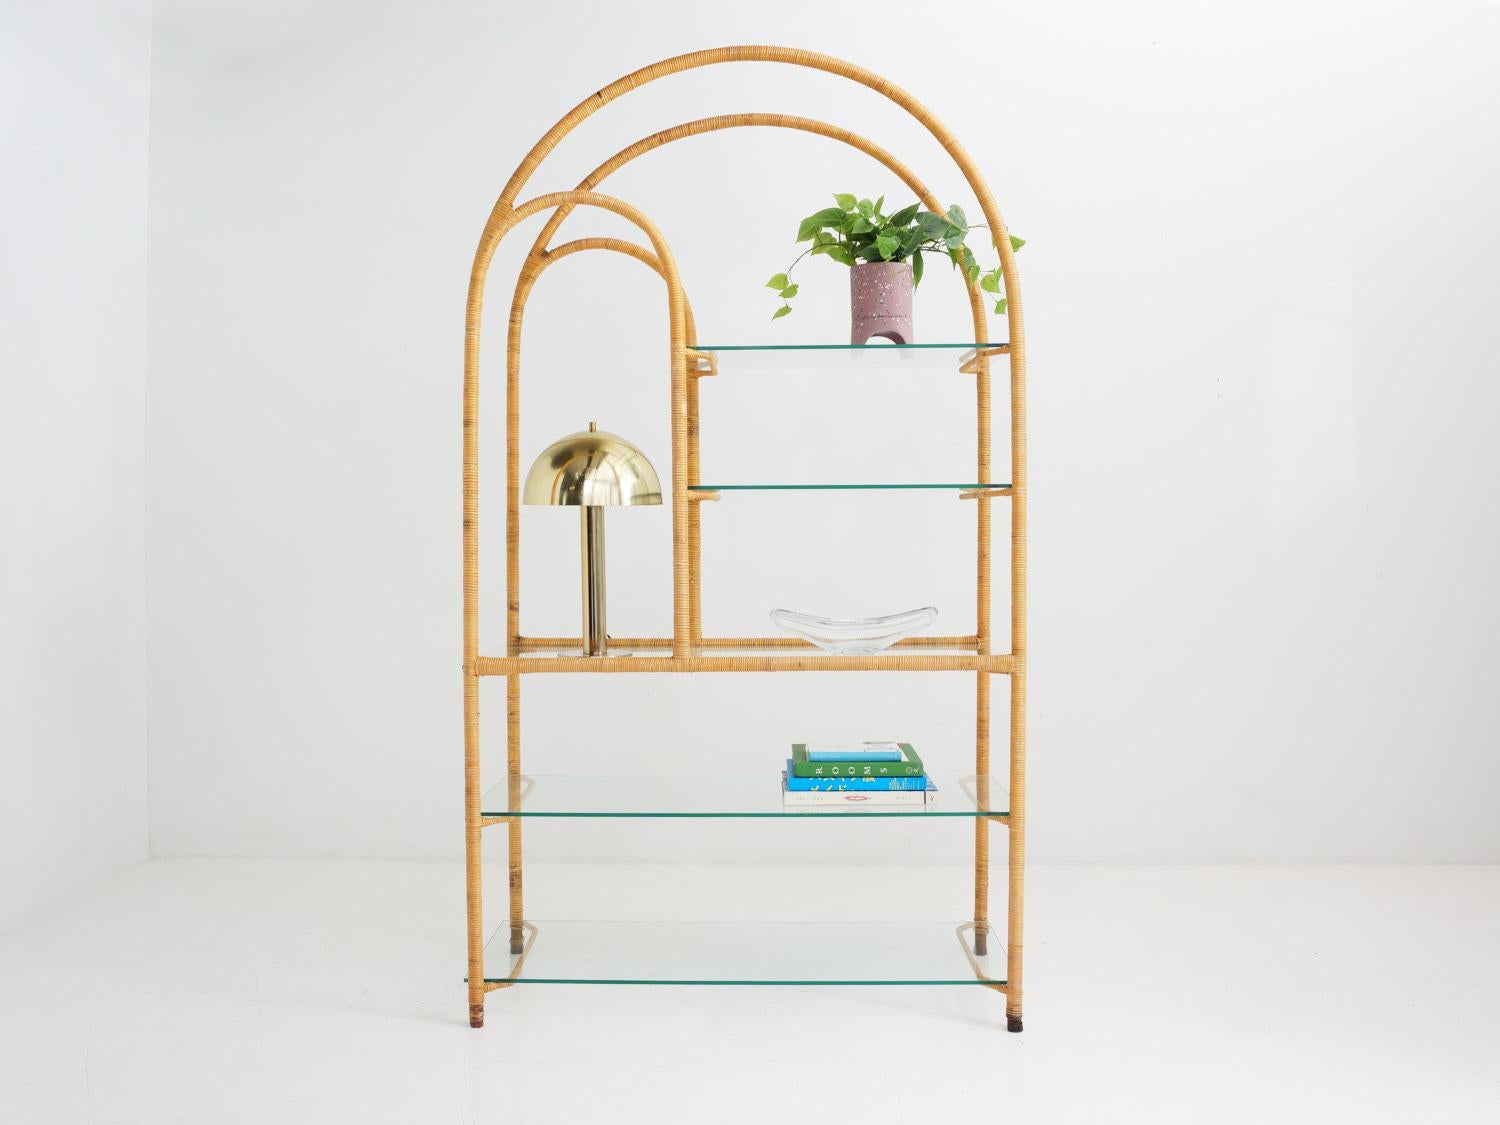 This arched étagère combines the warmth of rattan with an airy, open design, providing both functionality and charm to display your cherished items in style.

- 75.5